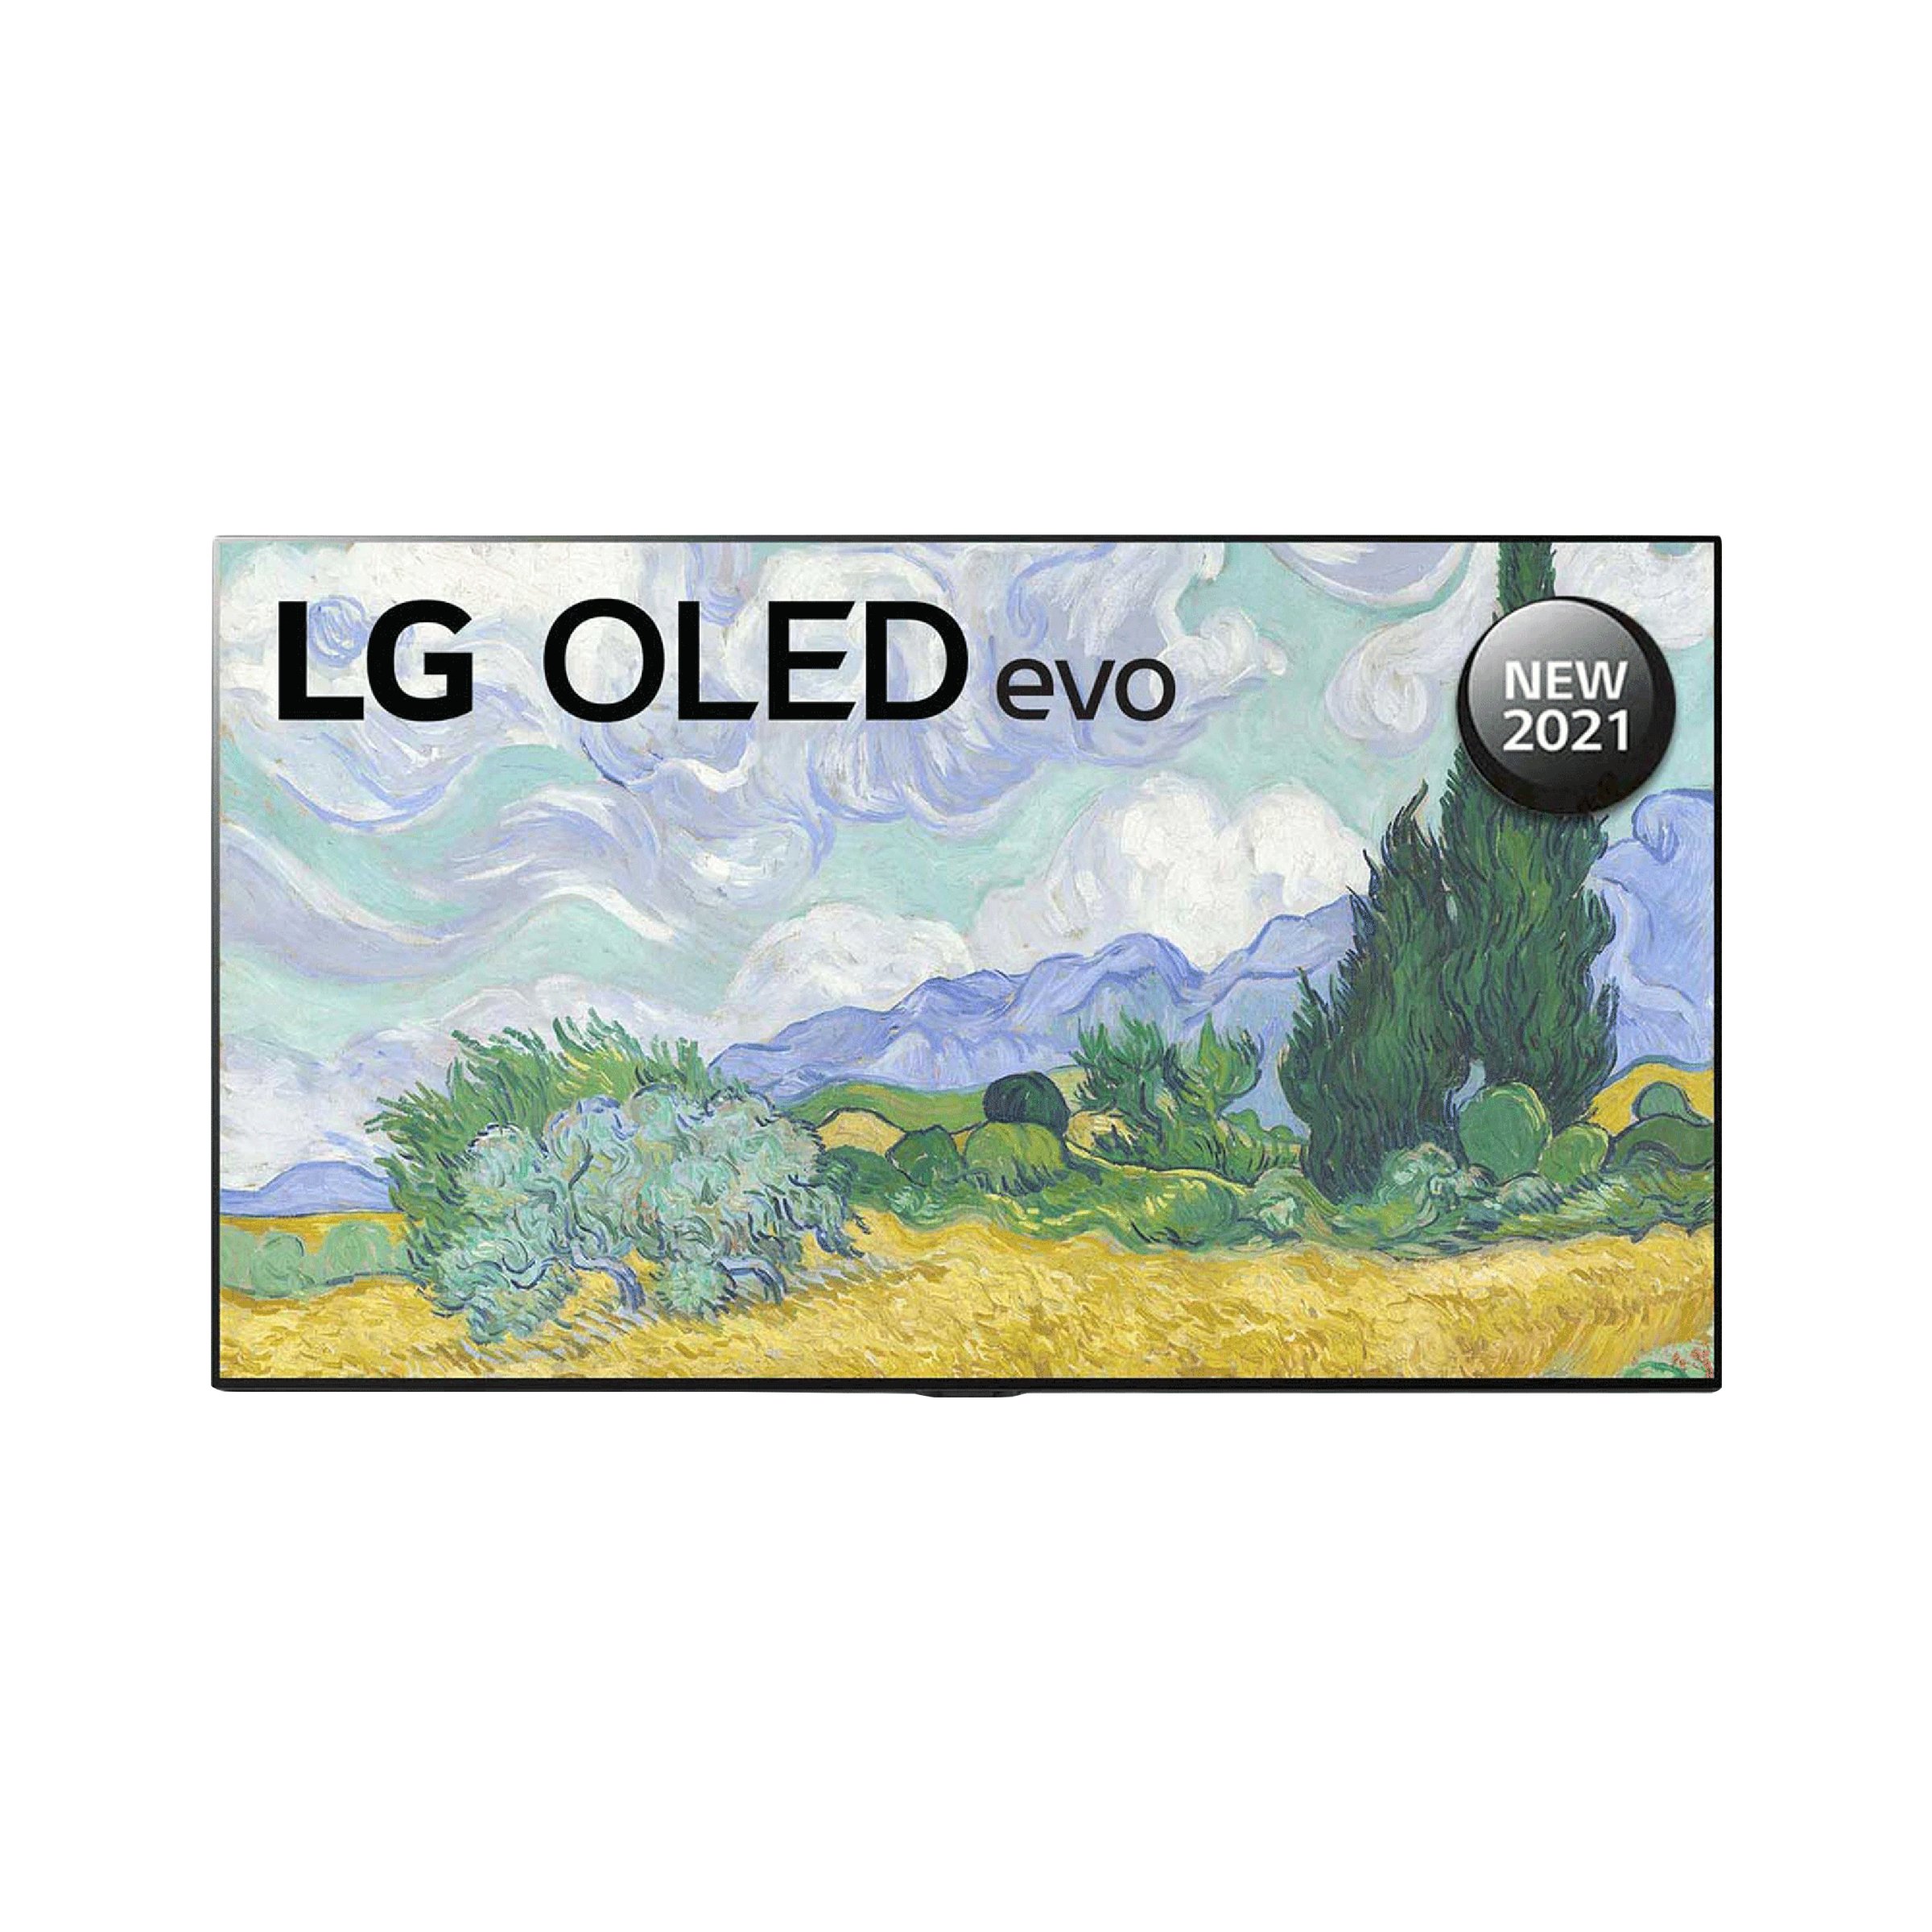 LG G1 164 cm (65 inch) OLED 4K Ultra HD WebOS TV with Alexa Compatibility (2021 model)_1